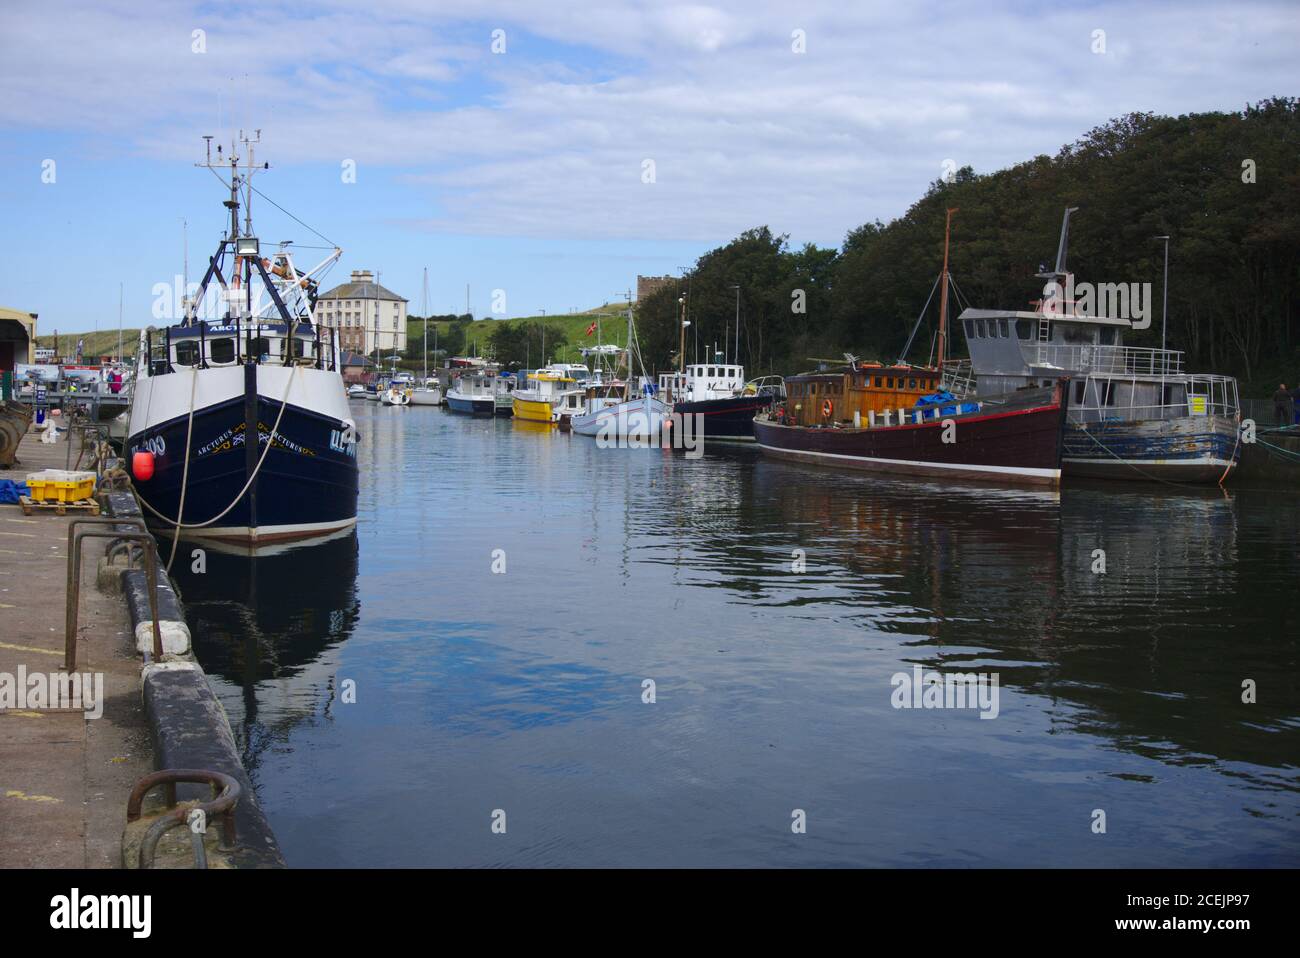 Boats of various types and sizes moored in Eyemouth harbour, Berwickshire, Scottish Borders, UK, with Gunsgreen House int the background. Stock Photo